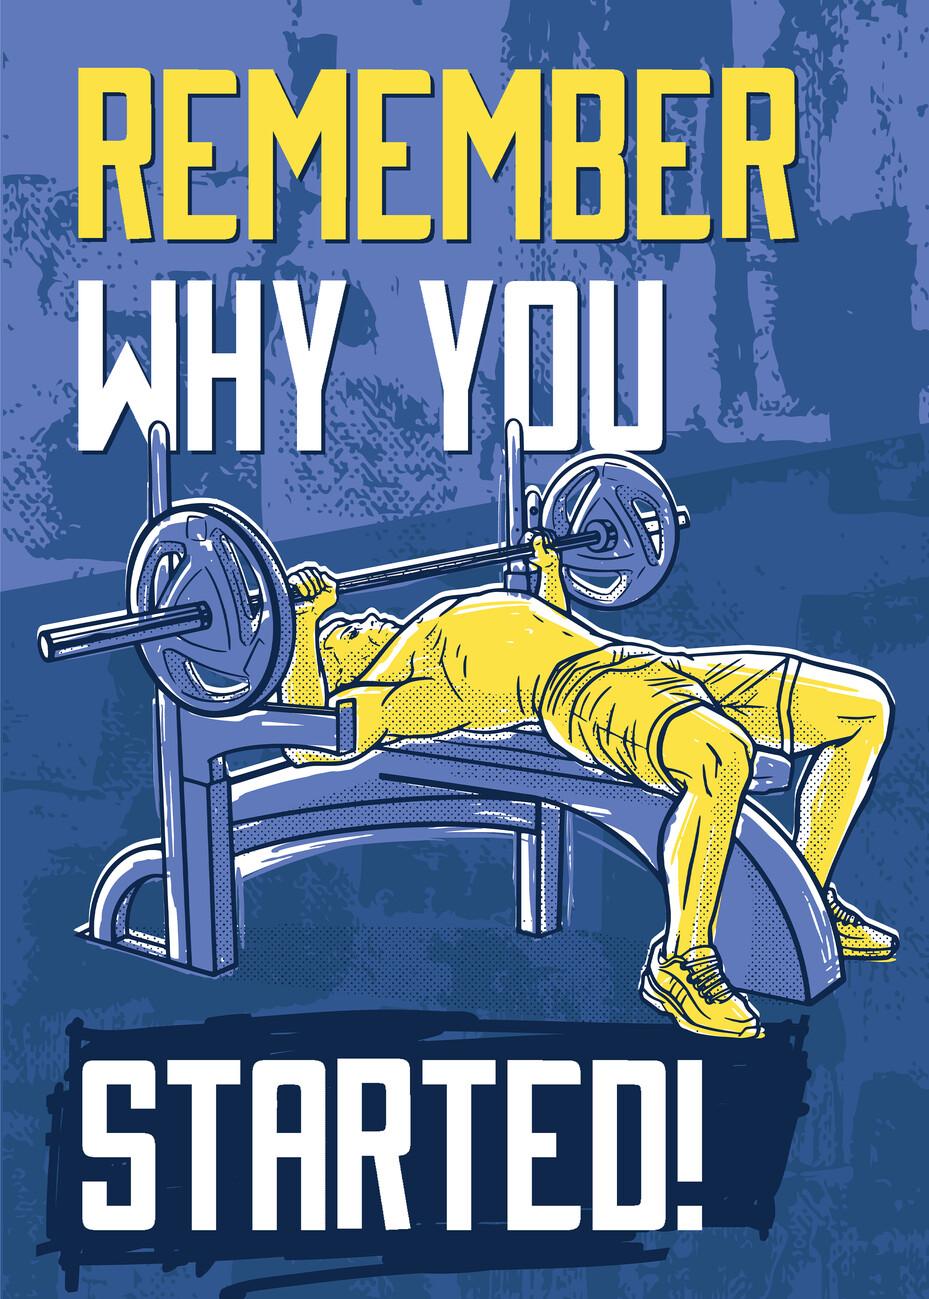 Remember Why You Started Fitness Motivation Wall Mural Buy